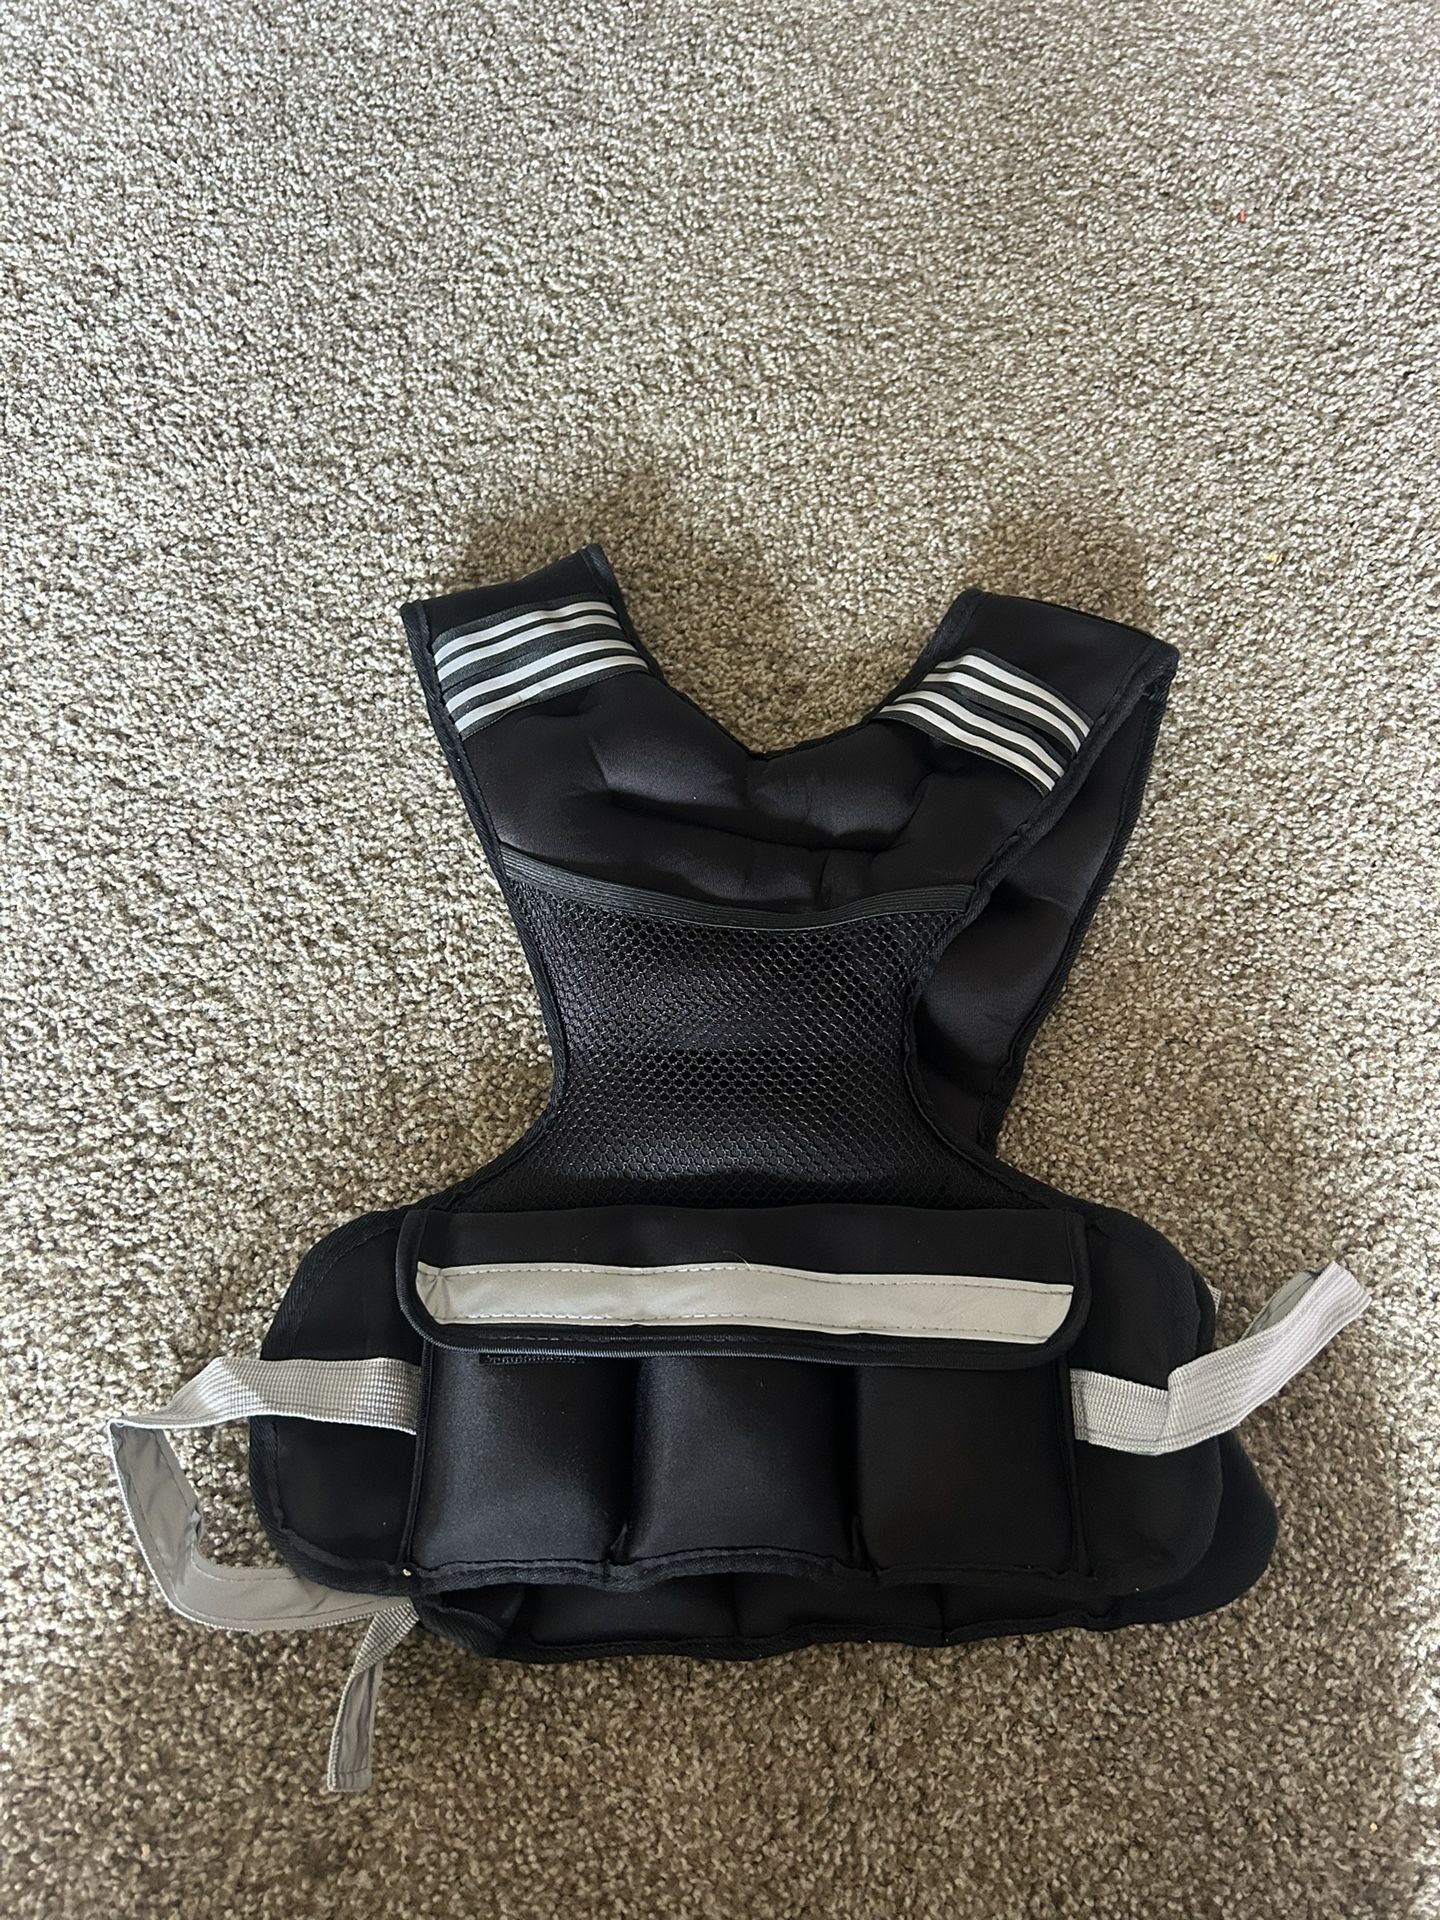 Adjustable Weighted vest 20-32lb